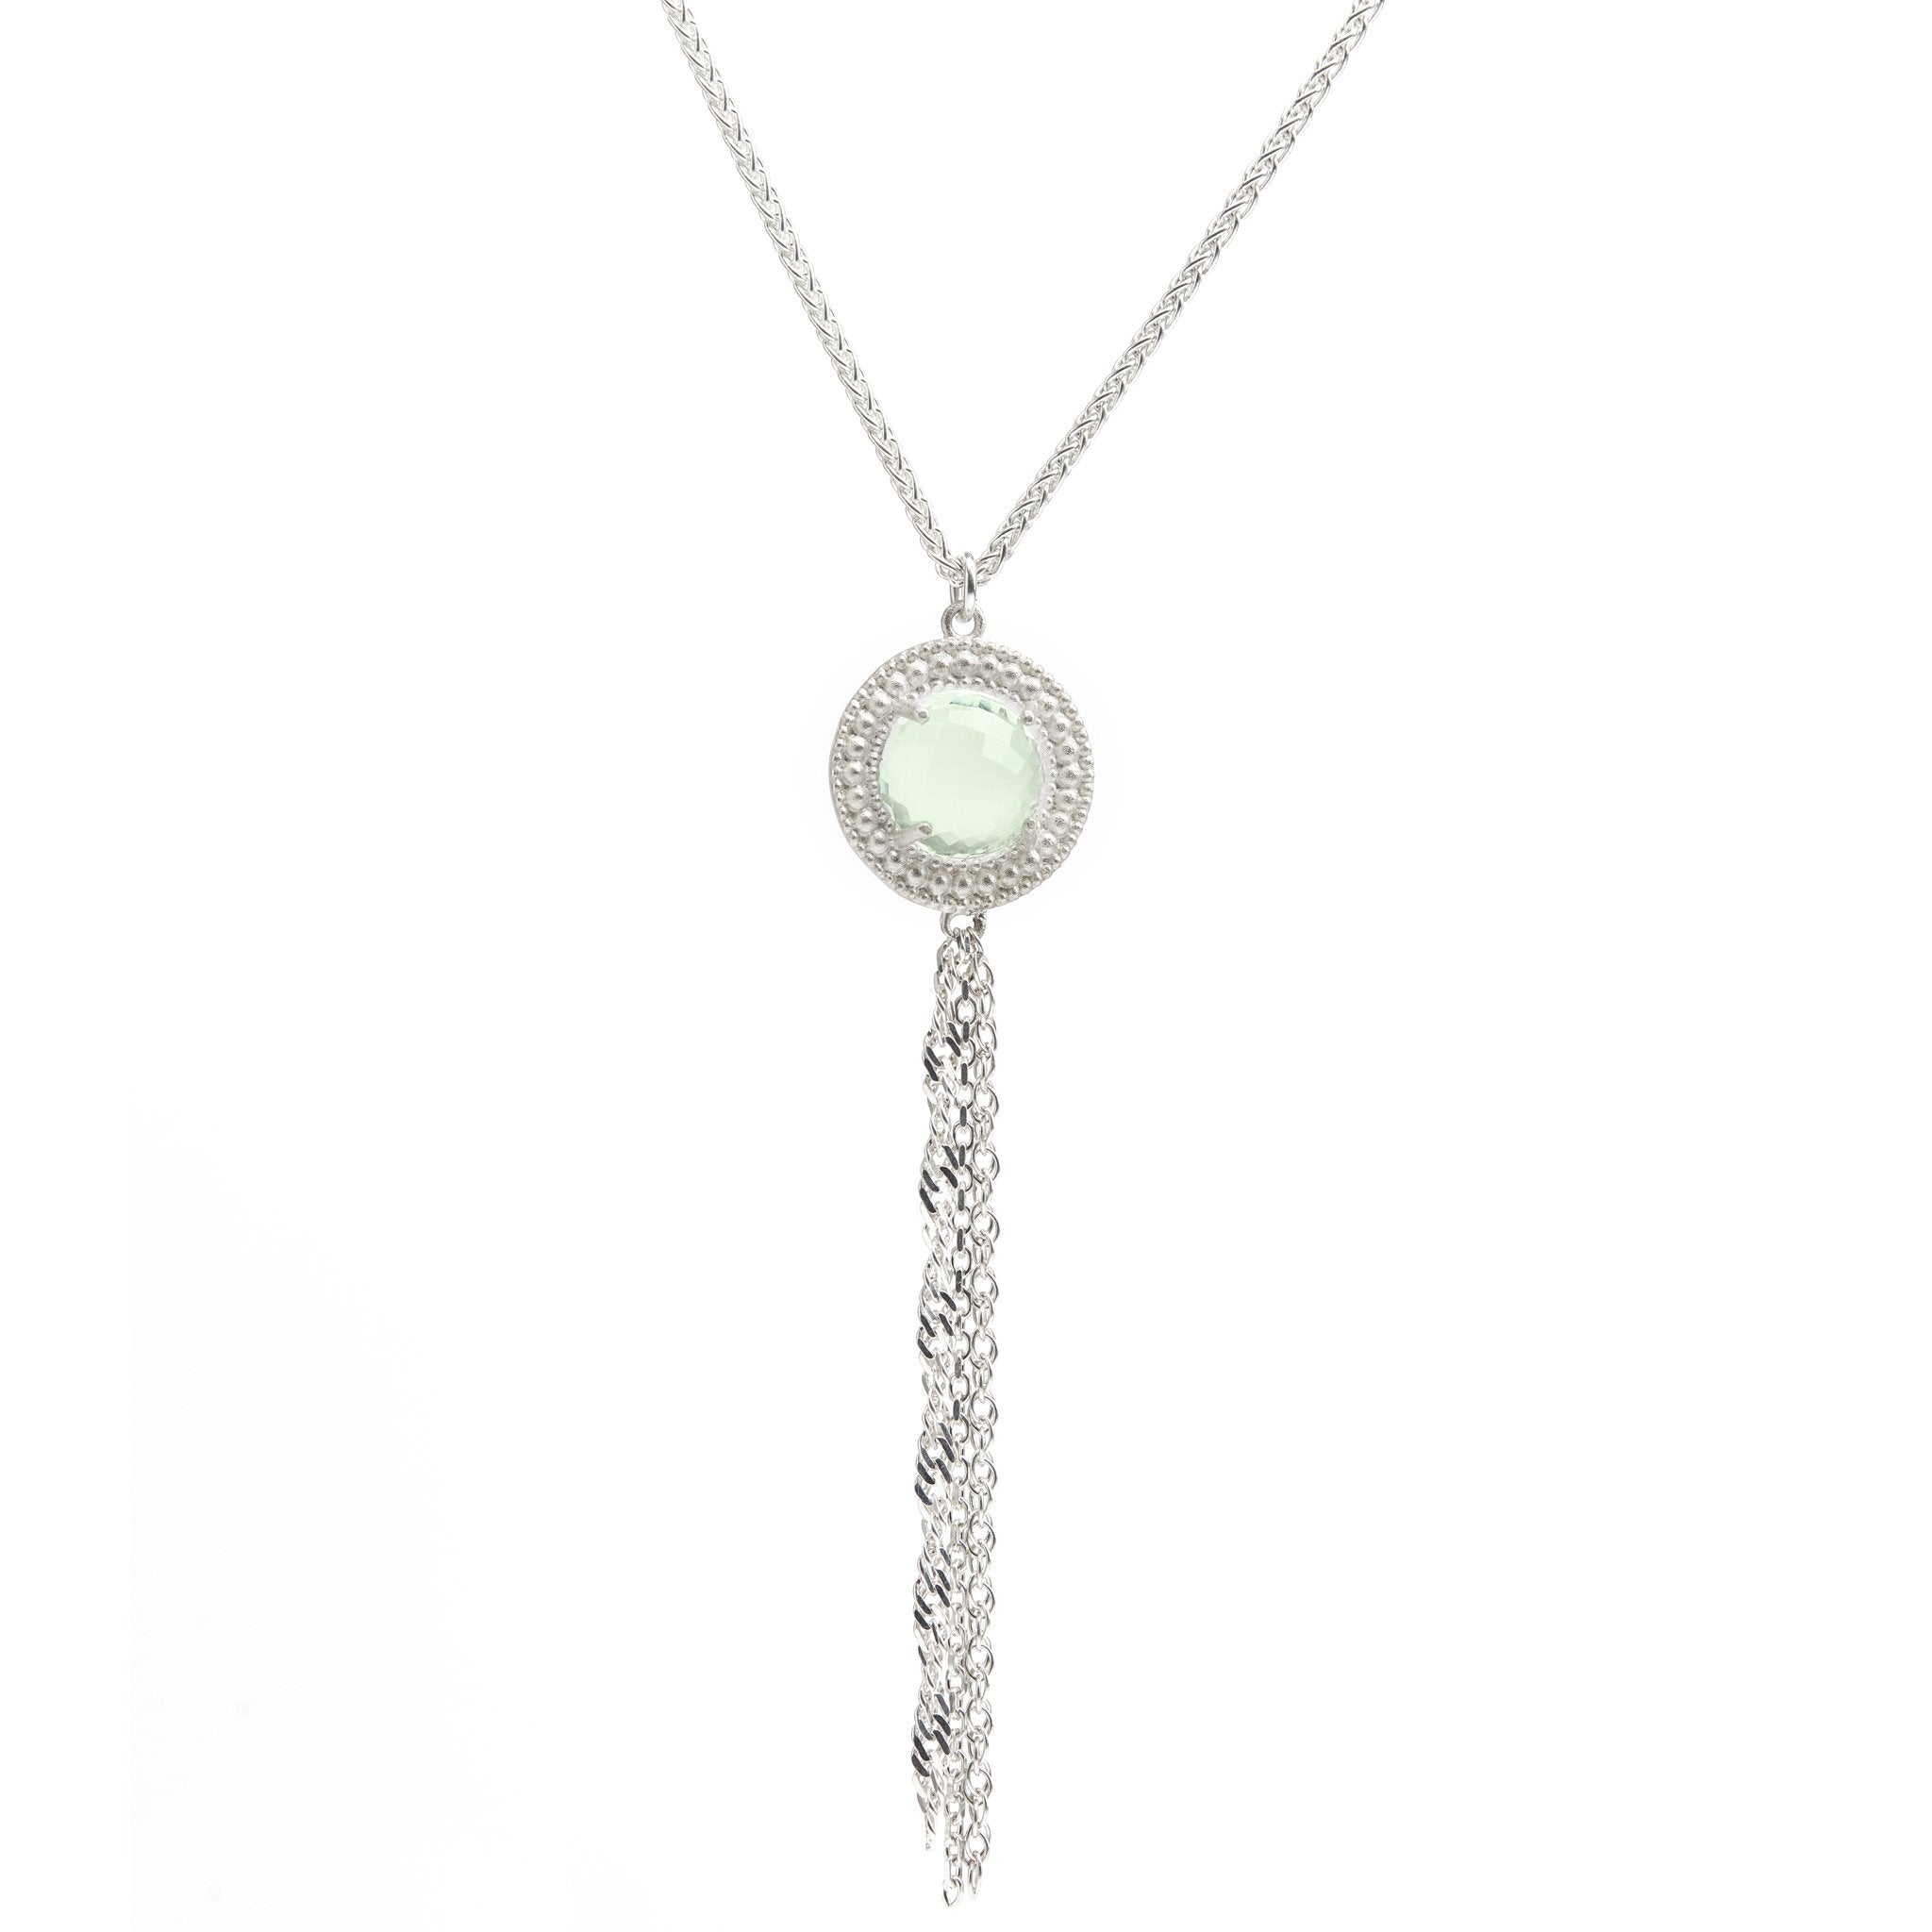 The Renaissance Ethnic necklace in green amethyst - Christelle Chamberland